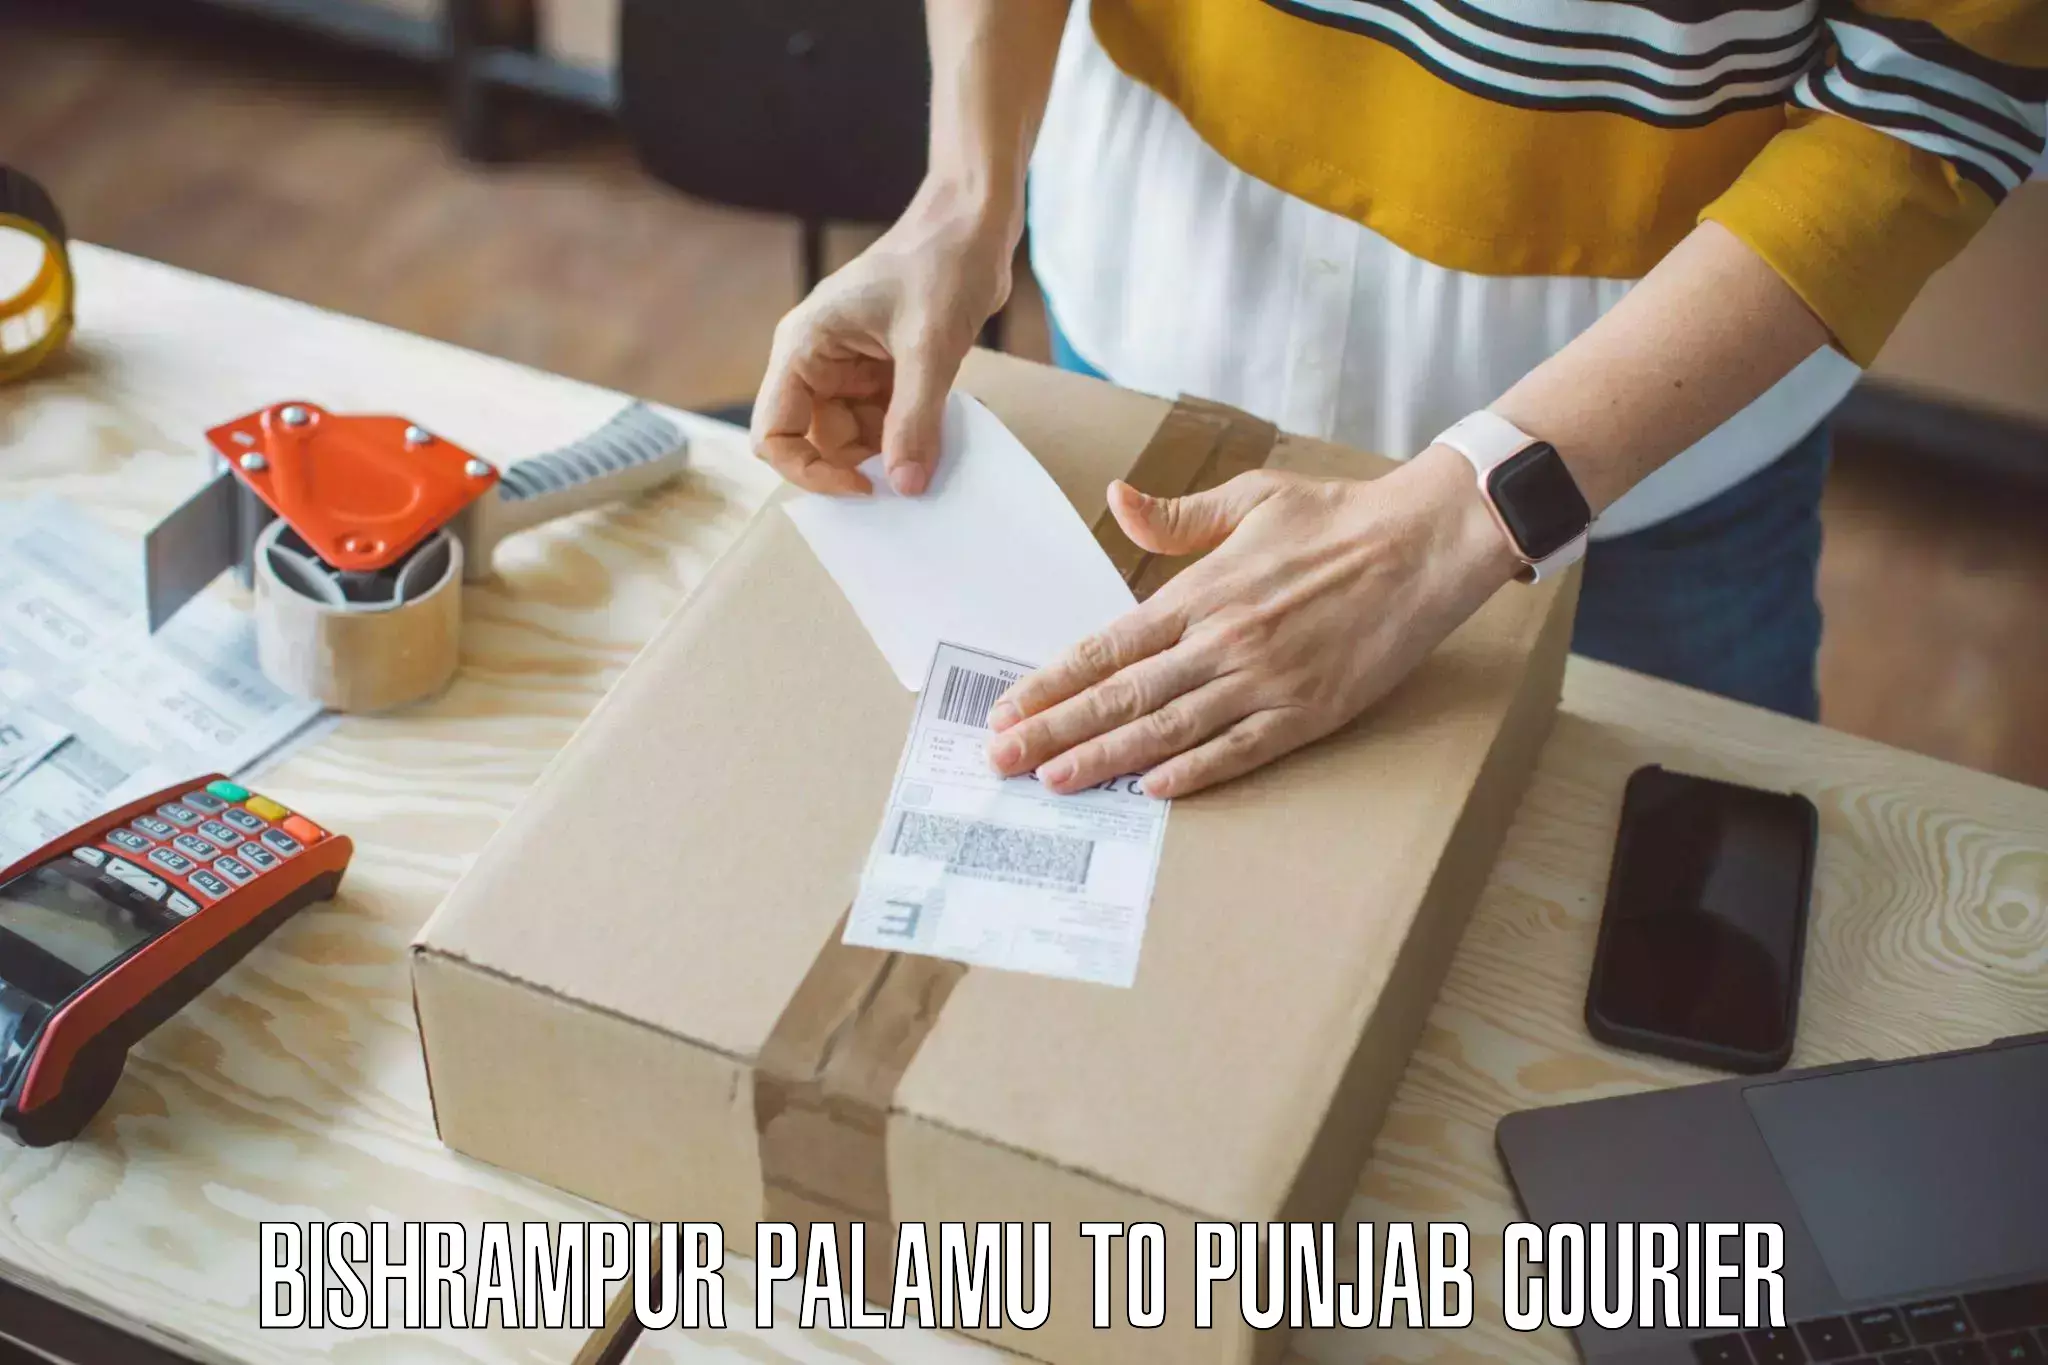 Home moving specialists Bishrampur Palamu to Firozpur